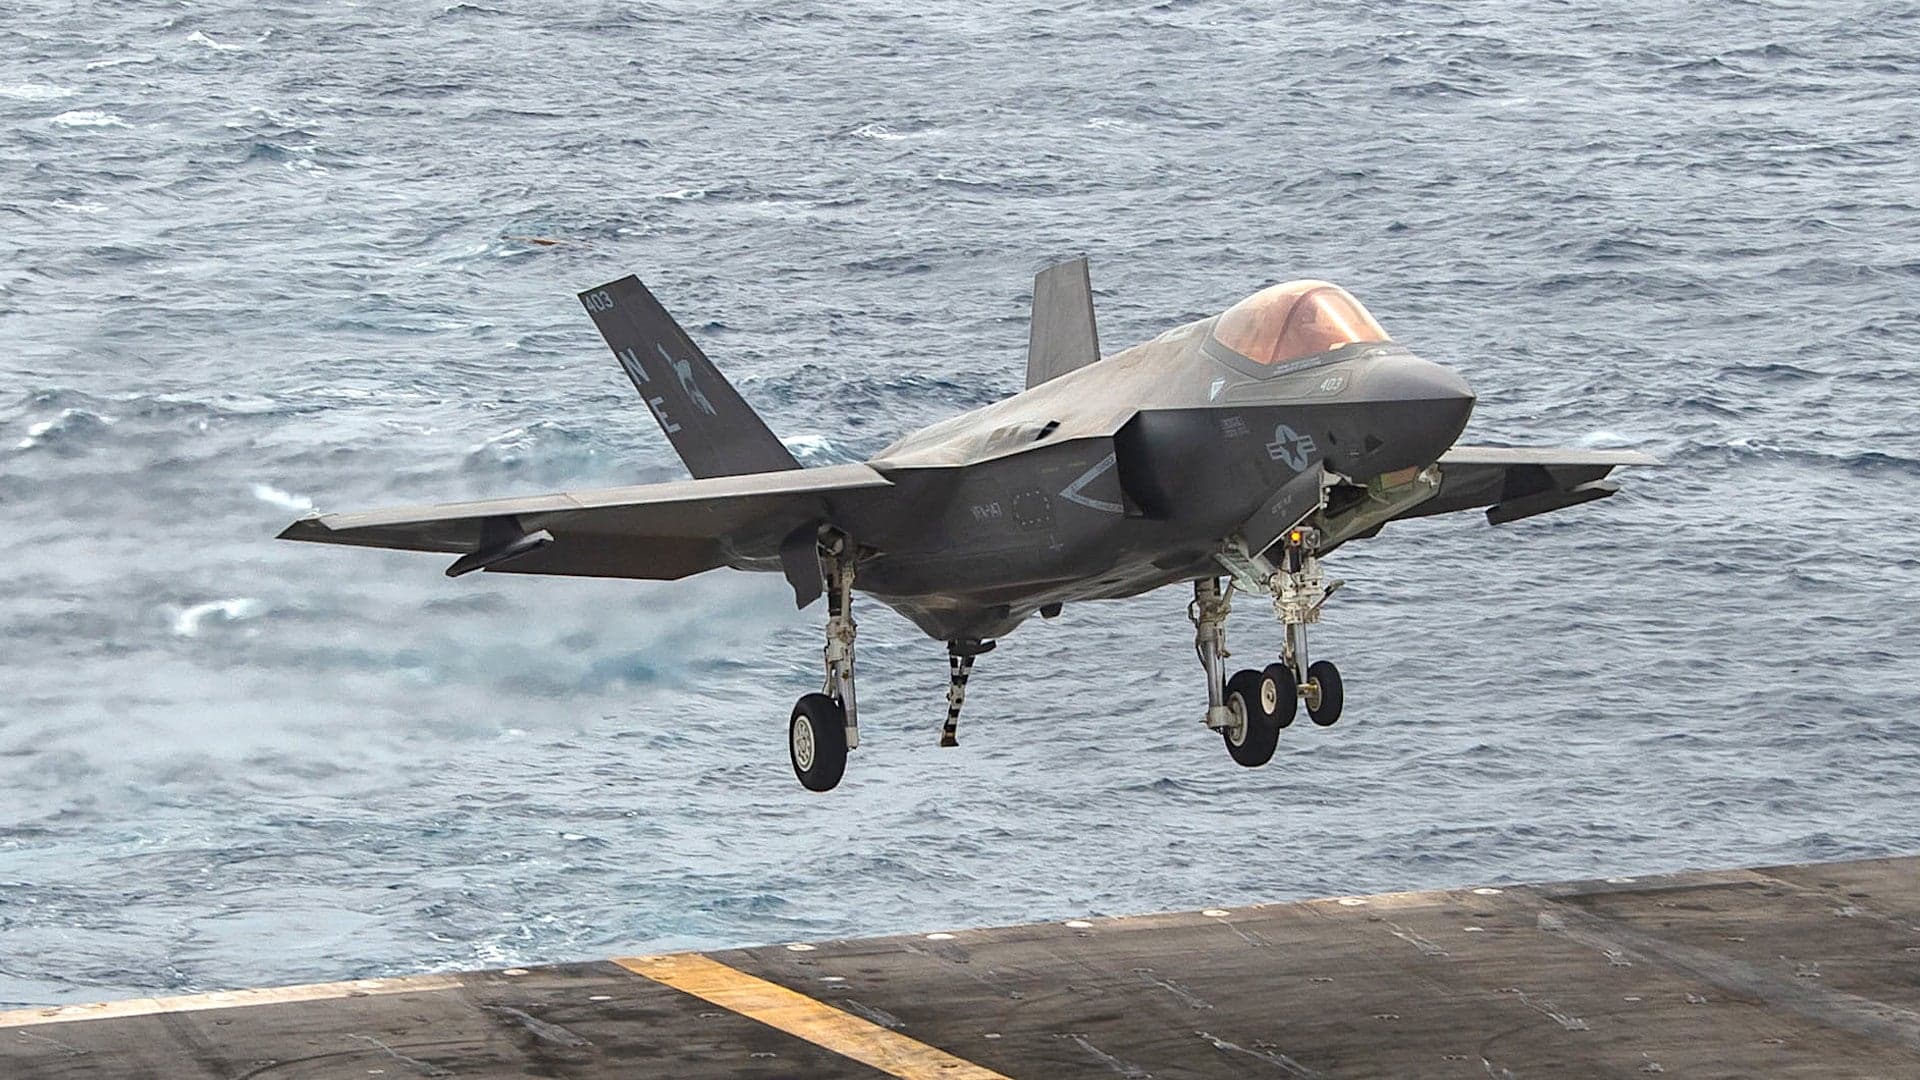 Navy Exploring Options For Recovering F-35C That Fell Into The South China Sea